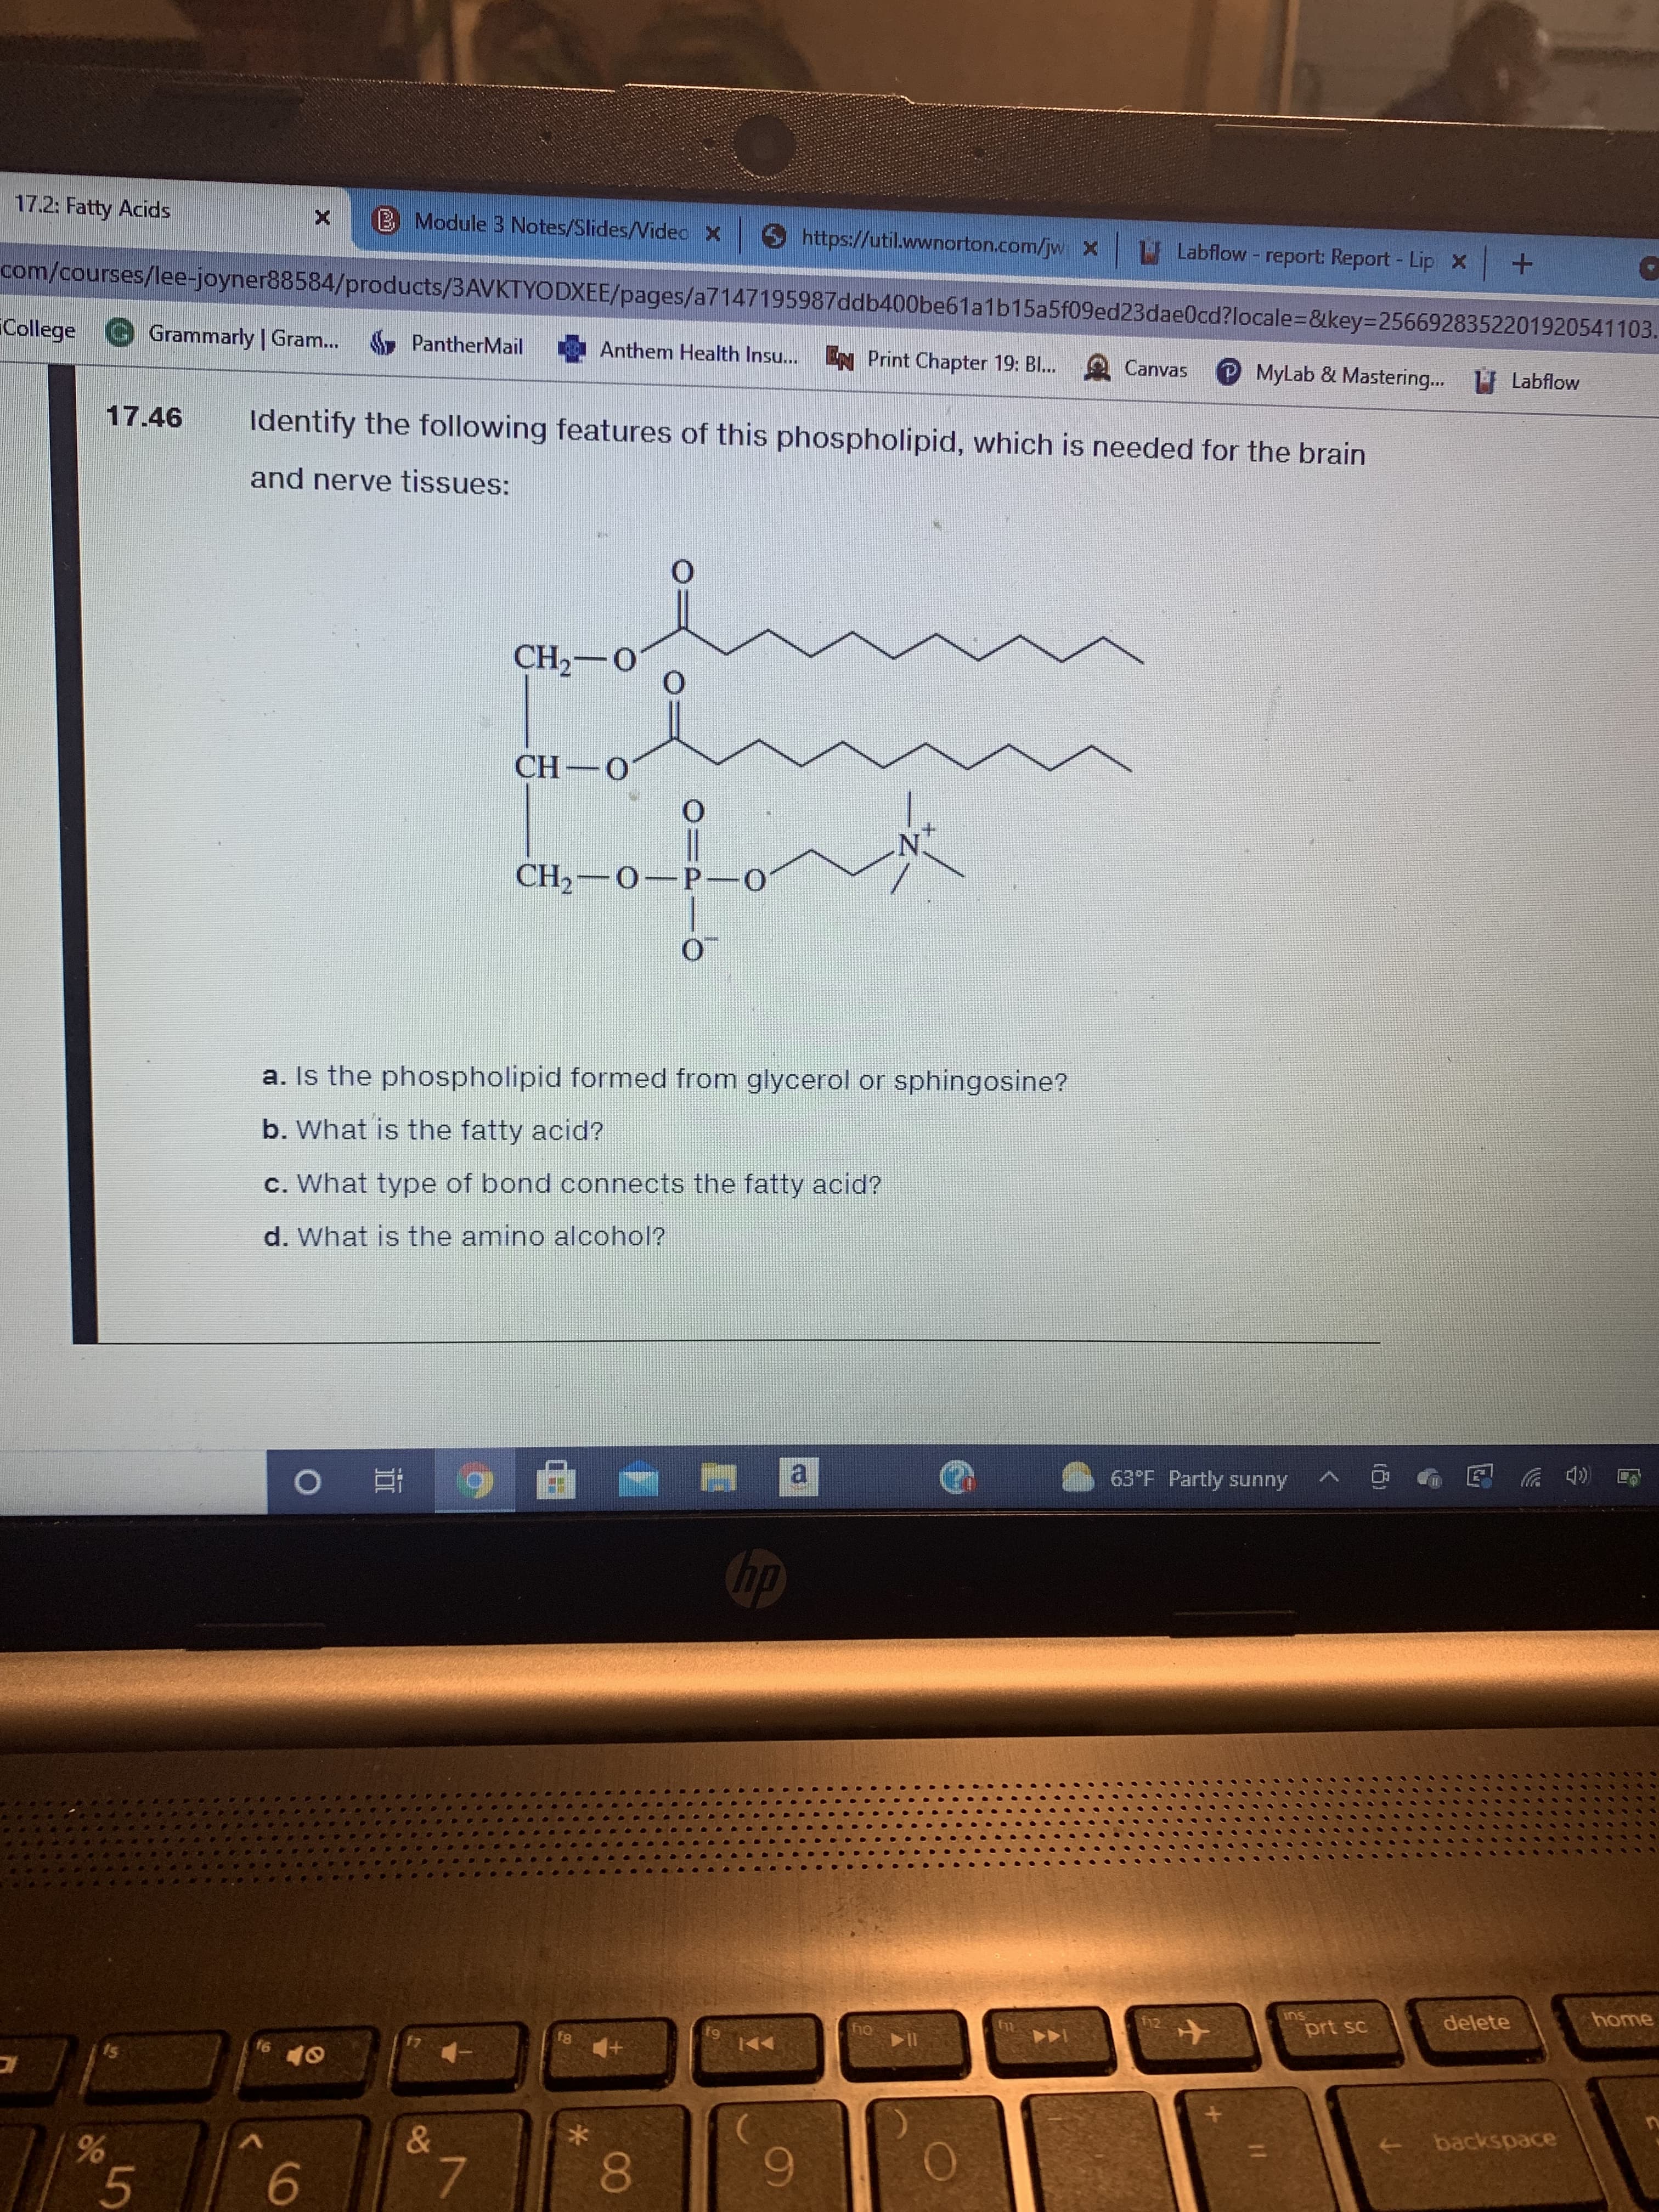 6
55
96
17.2: Fatty Acids
B Module 3 Notes/Slides/Video X
https://util.wwnorton.com/jwx U Labflow - report: Report - Lip x +
com/courses/lee-joyner88584/products/3AVKTYODXEE/pages/a7147195987ddb400be61a1b15a5f09ed23daeOcd?locale=D&key%3D2566928352201920541103.
College
Grammarly | Gram.. PantherMail
Anthem Health Insu... N Print Chapter 19: Bl... Canvas
PMyLab & Mastering... H Labflow
17.46
Identify the following features of this phospholipid, which is needed for the brain
and nerve tissues:
N.
0-d-0-H
a. Is the phospholipid formed from glycerol or sphingosine?
b. What is the fatty acid?
c. What type of bond connects the fatty acid?
d. What is the amino alcohol?
a
63°F Partly sunny
dy
home
SUI
prt sc
delete
61
I14
11
IC
backspace
7.
